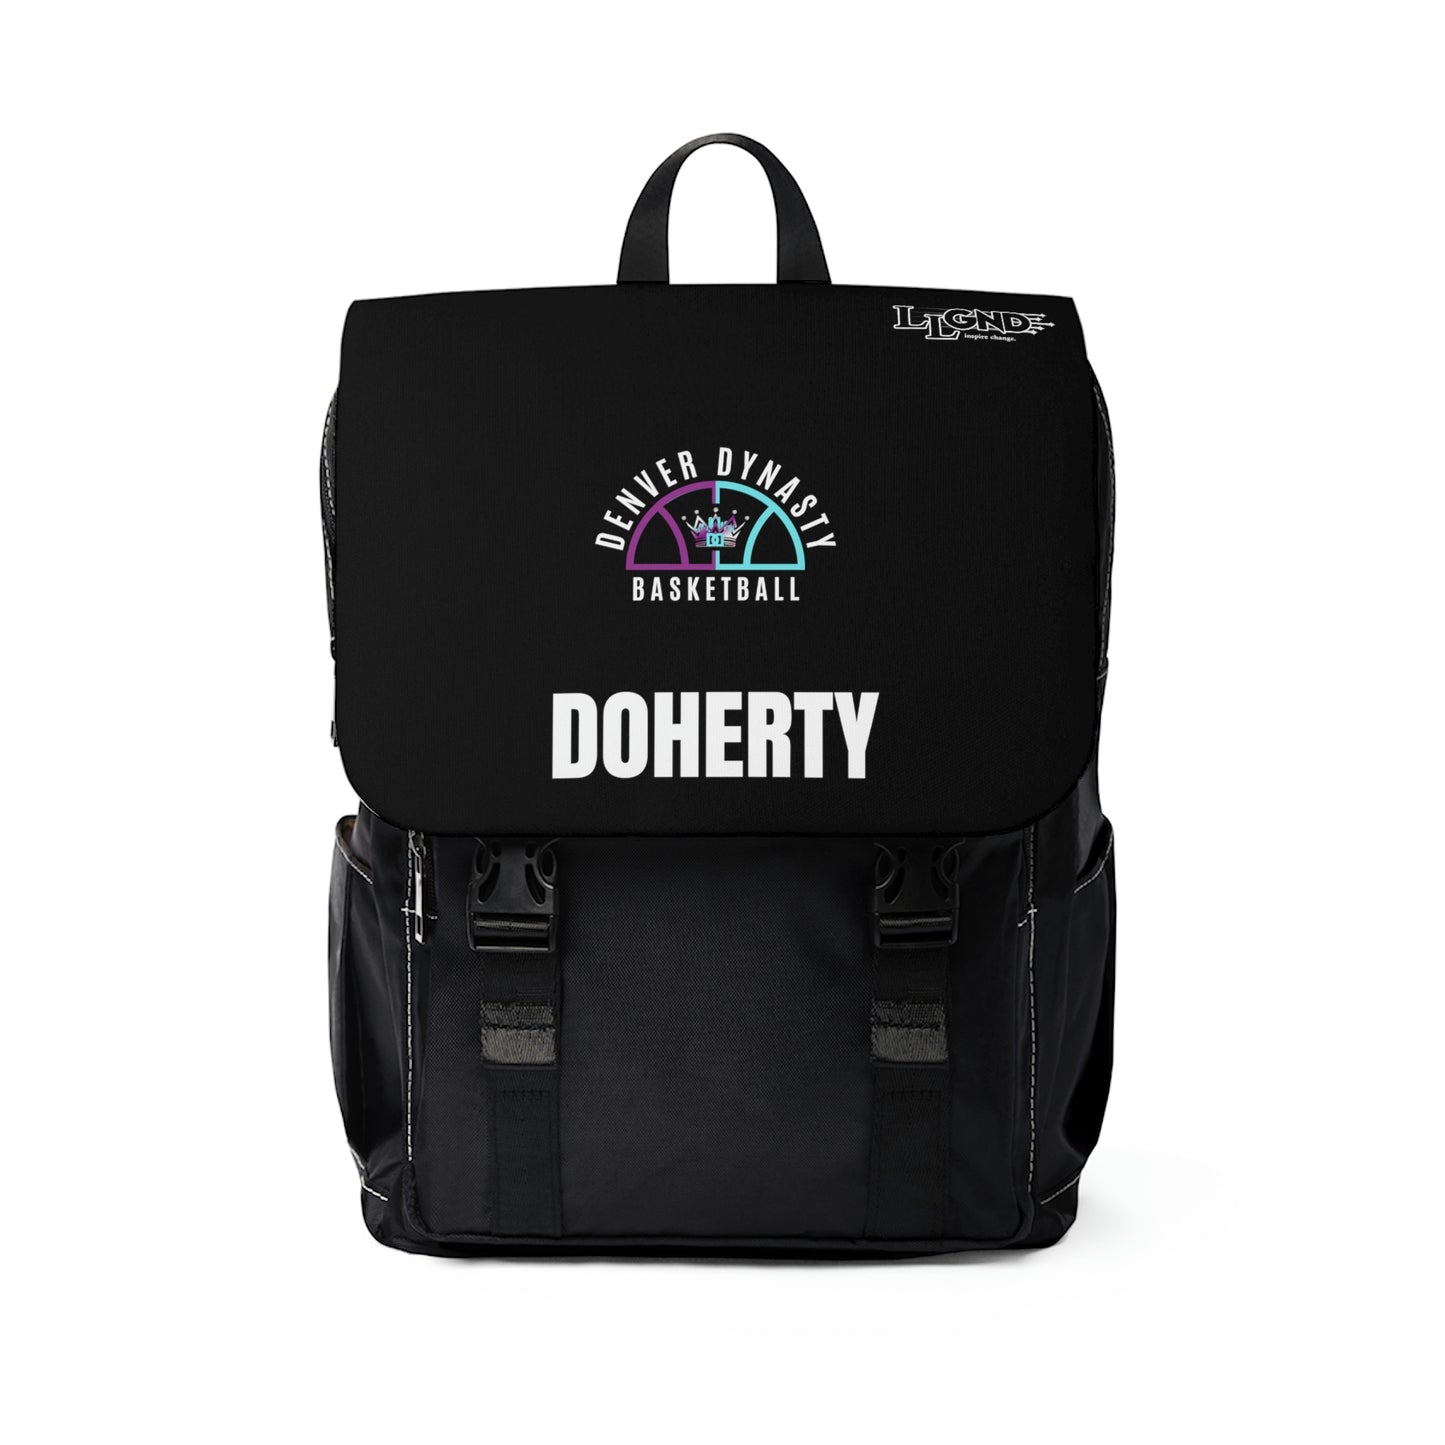 DYNASTY TEAM BACKPACK (DOHERTY)